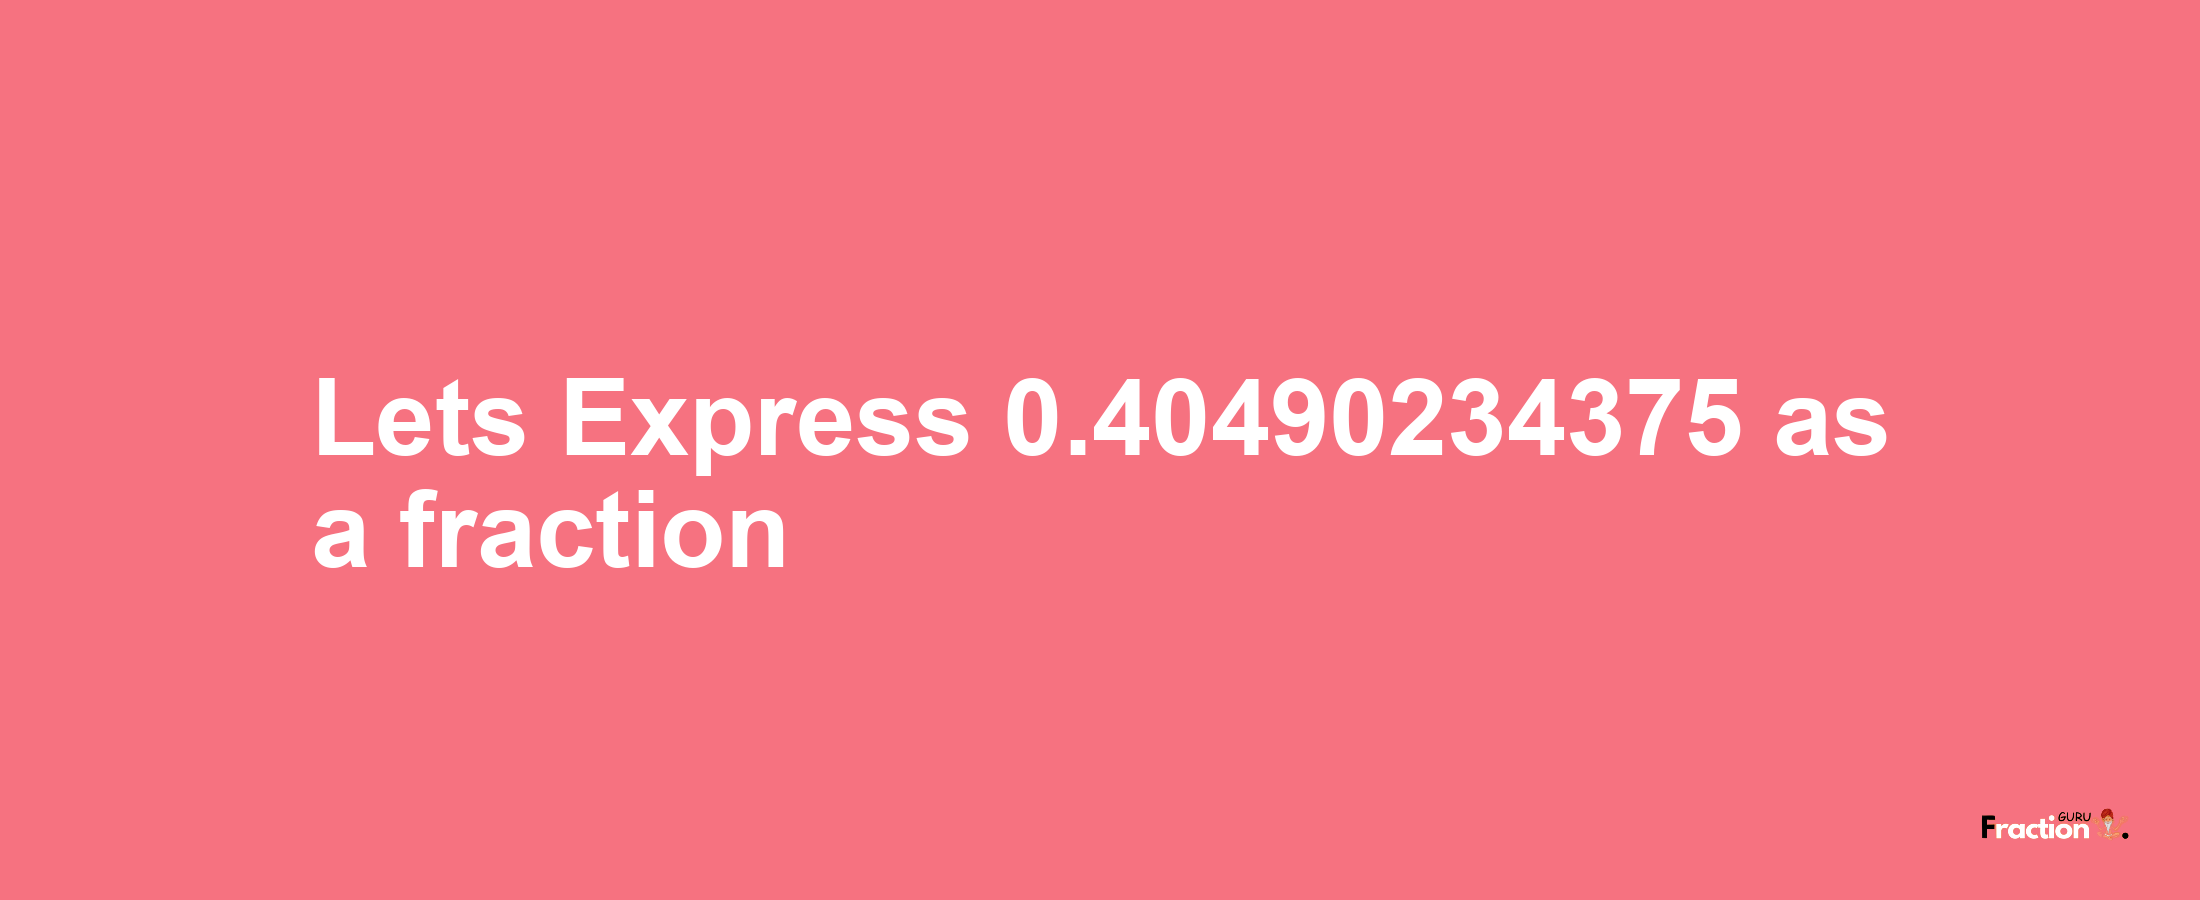 Lets Express 0.40490234375 as afraction